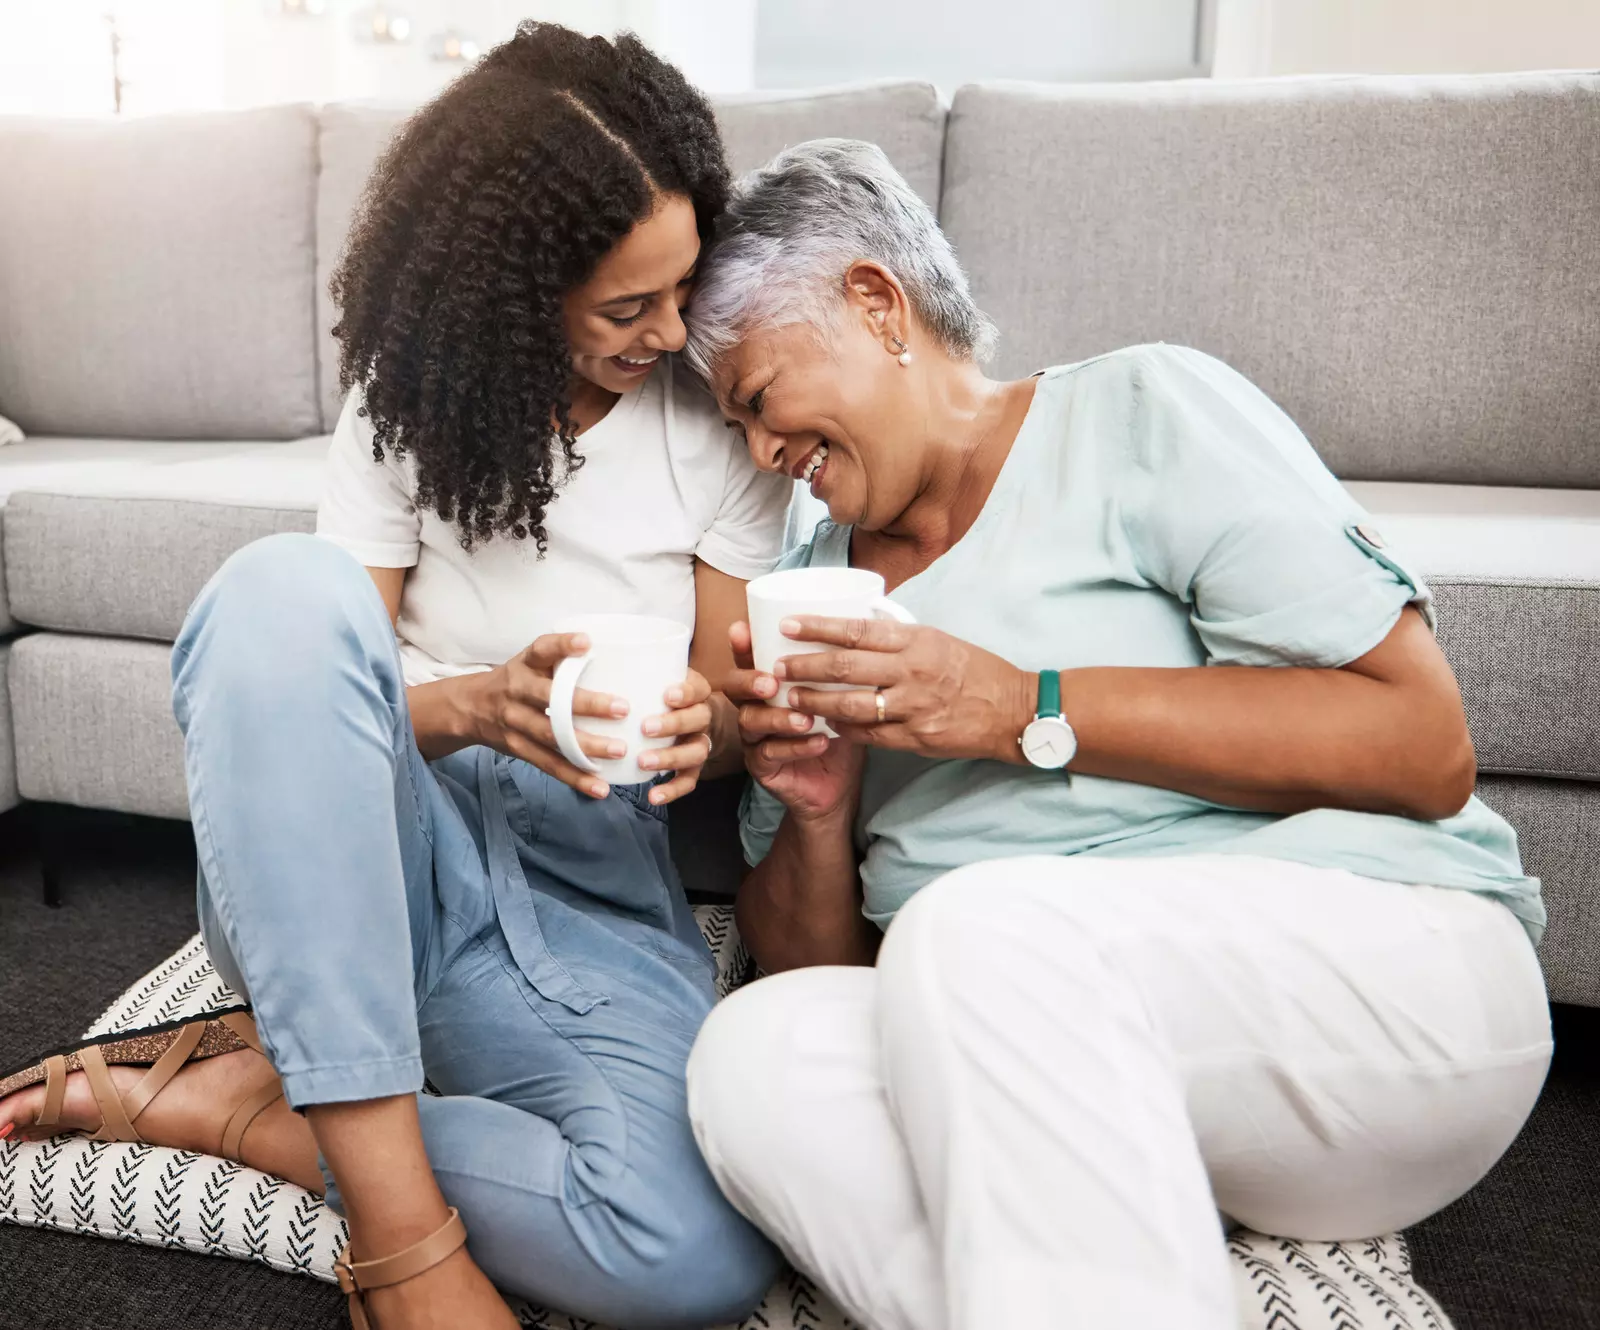 Relax, laughing and senior mother and daughter with coffee cup for home conversation, talking and bonding together